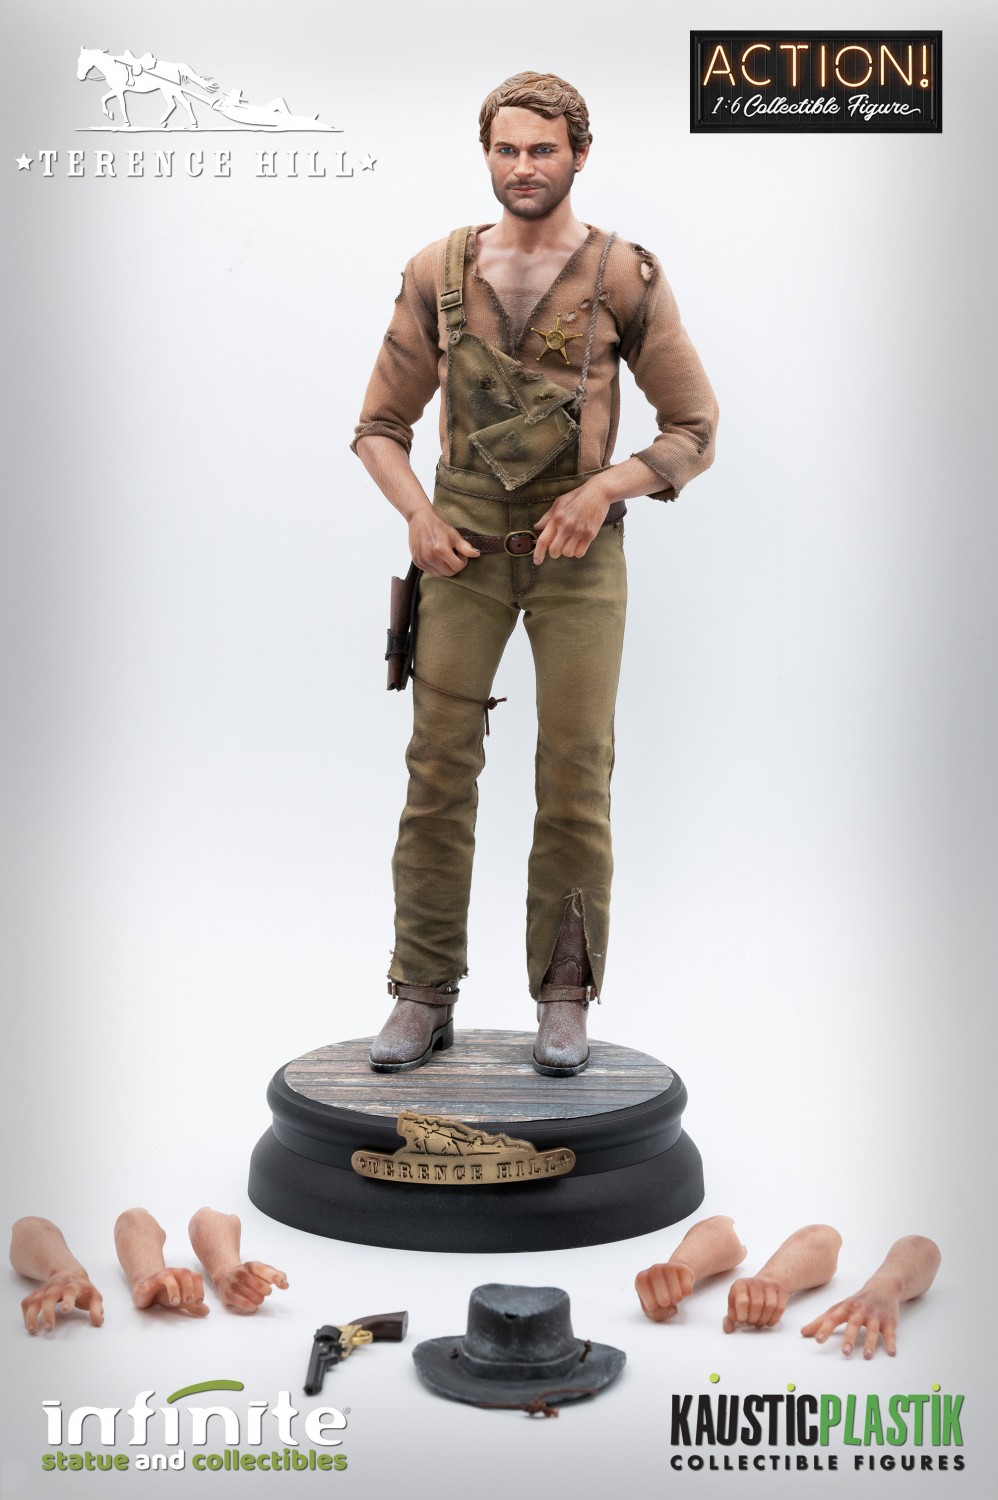 NEW PRODUCT: INFINITE STATUE & KAUSTIC PLASTIK TERENCE HILL 1/6 ACTION - REGULAR, DELUXE, EXCLUSIVE, DIORAMA Terence-hill-16-action-figure-regular-edition